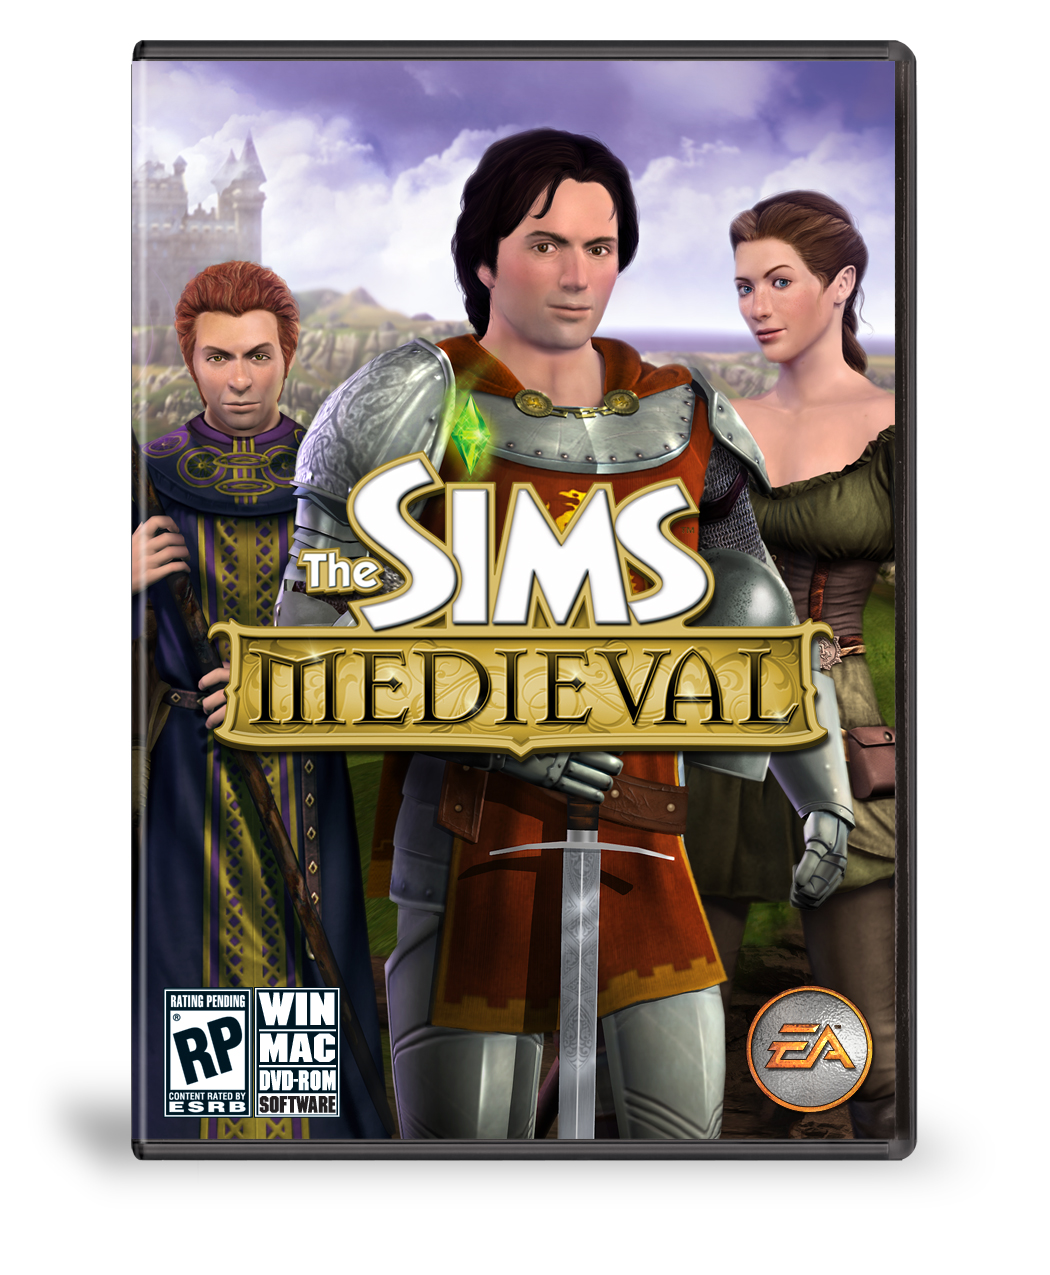 the sims medieval pirates and nobles review